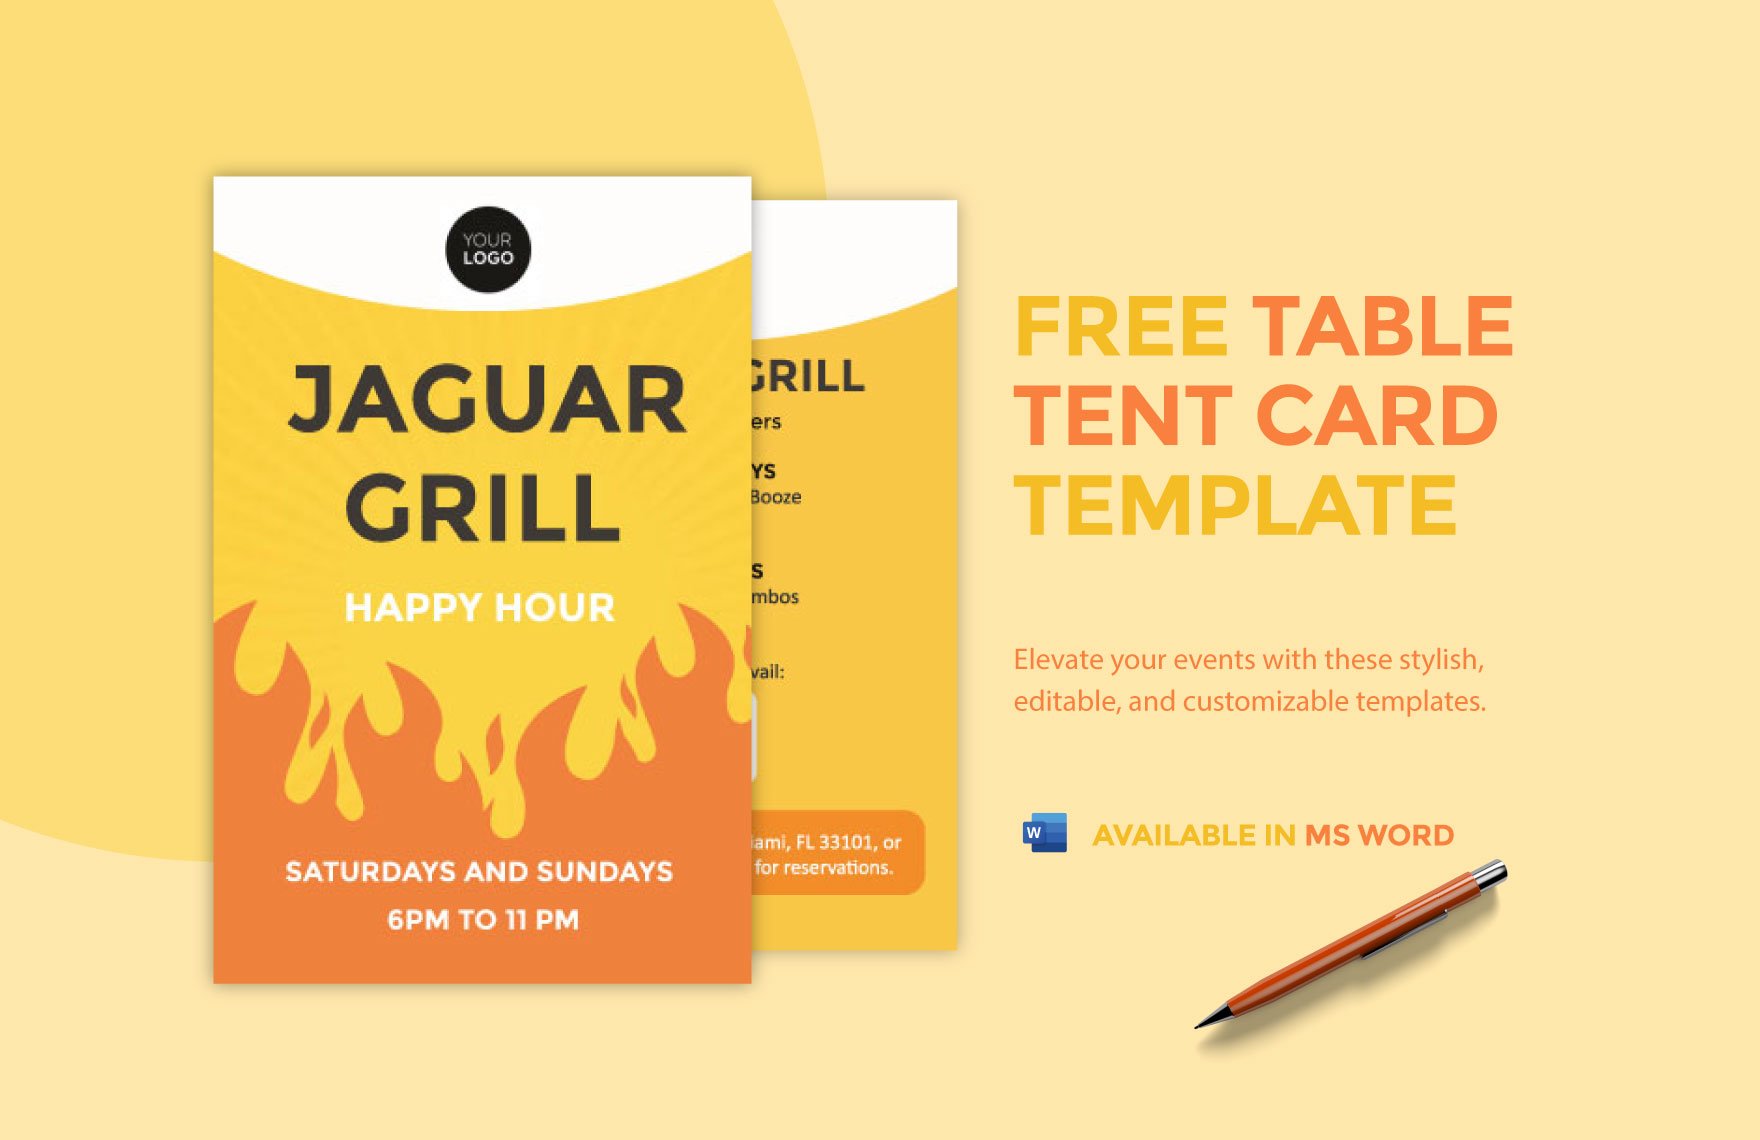 Free Table Tent Card Template in Word